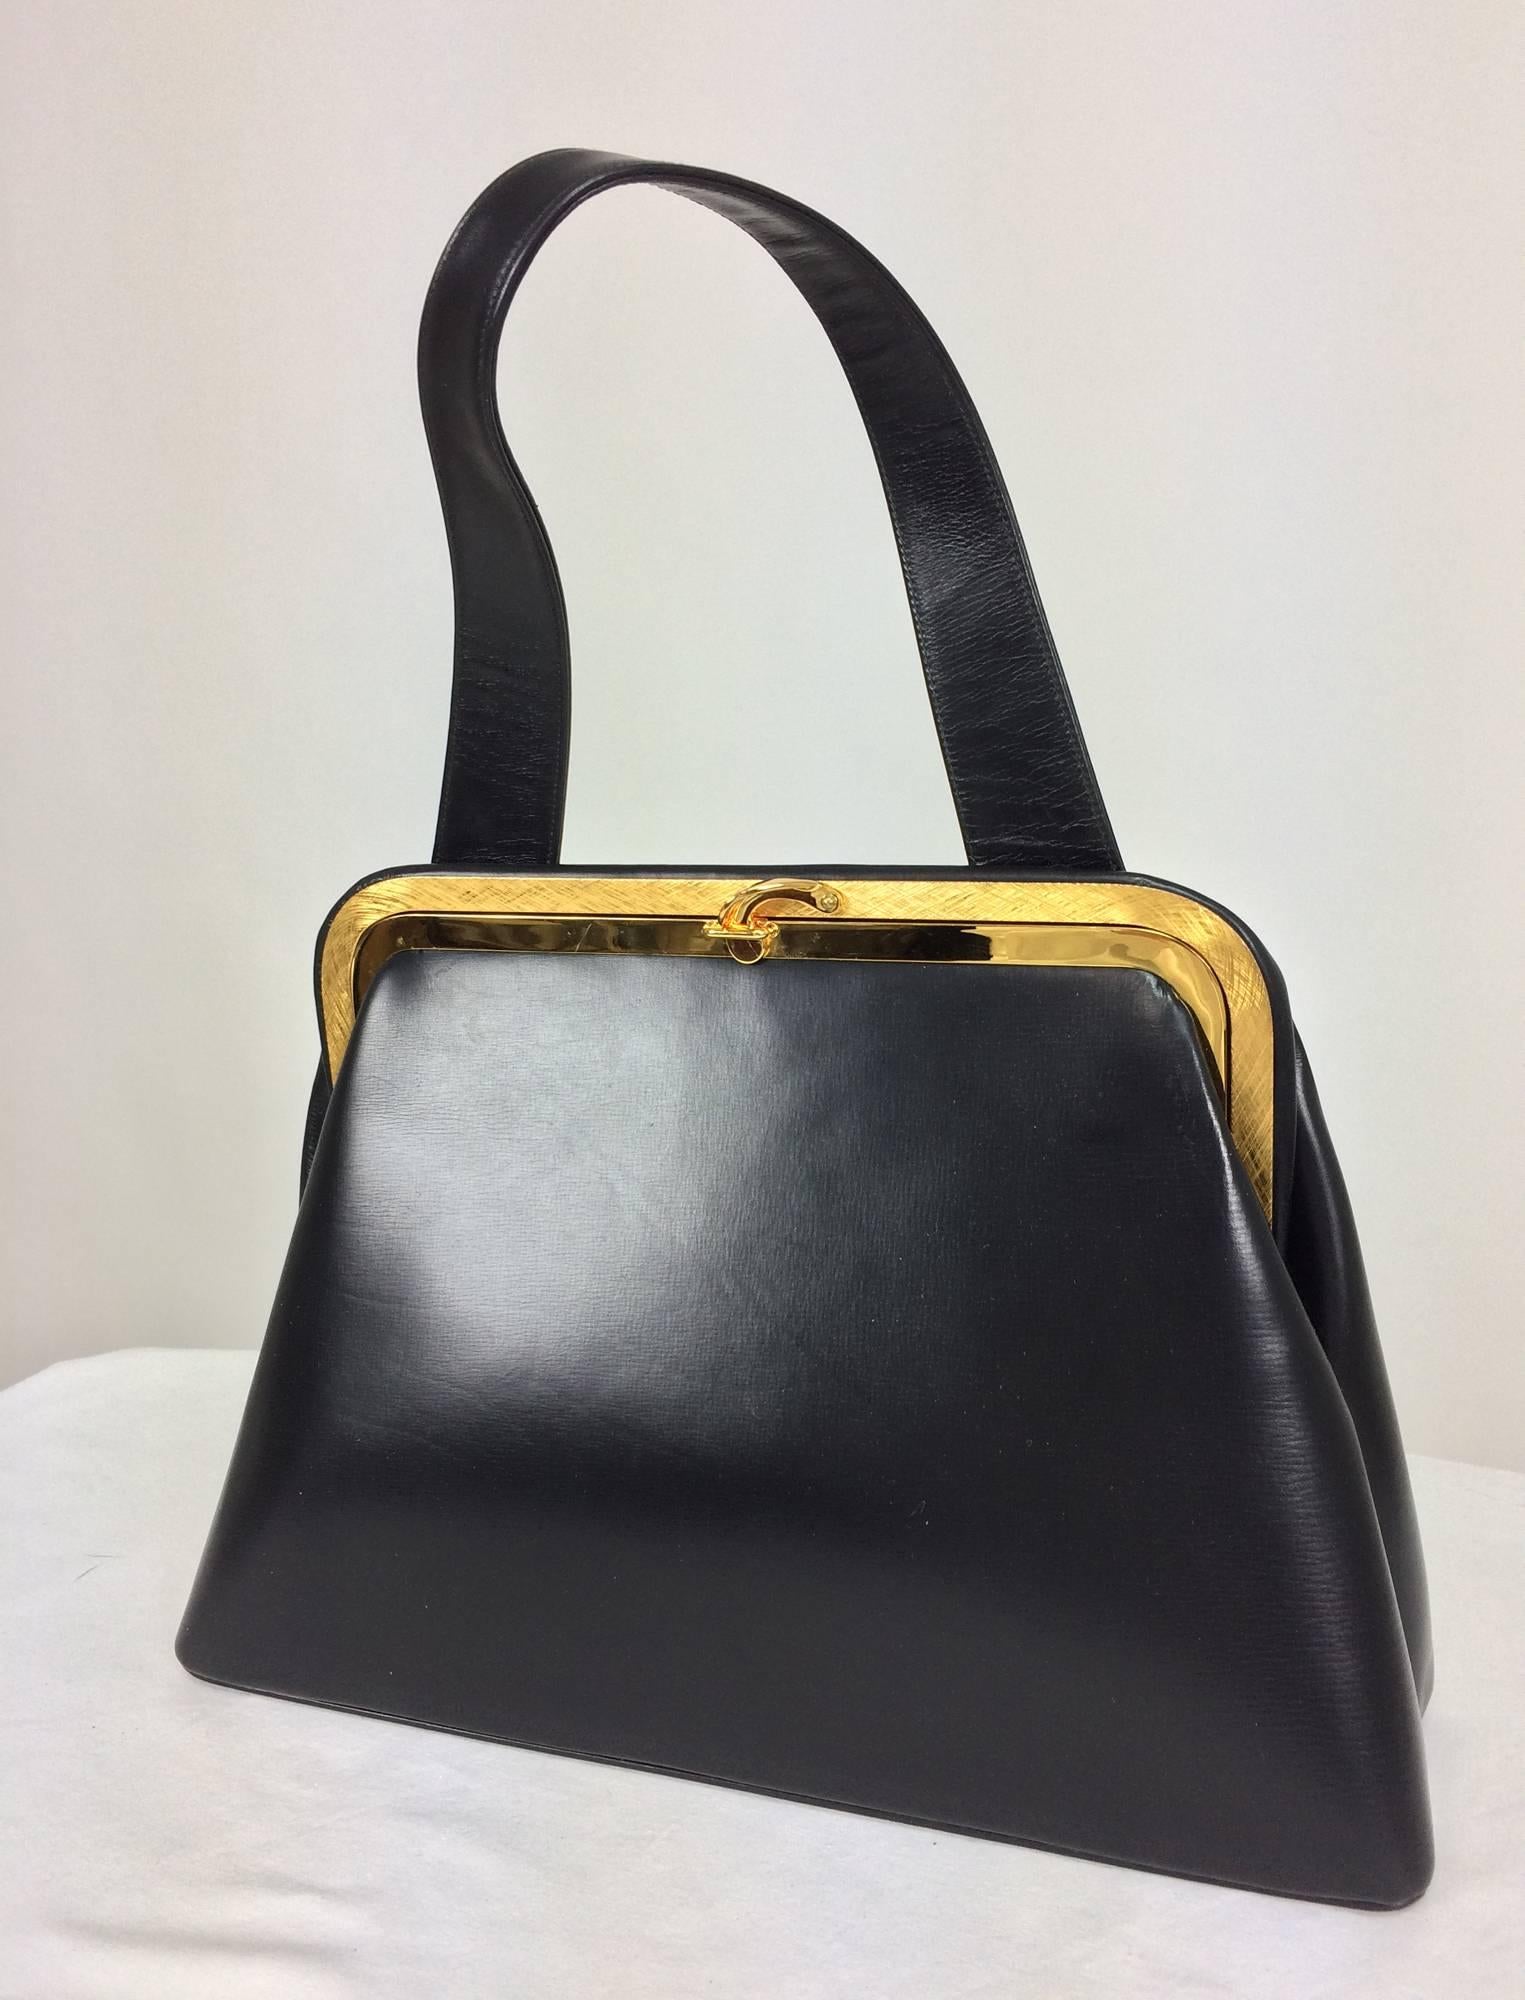 Bienen-Davis black box calf structured handbag with gold hardware 1950s...Beautiful vintage bag, looks barely, if ever worn...Brushed gold frame with latch closure...Handle is set at the top back of the bag, it is wide where it is attached to the